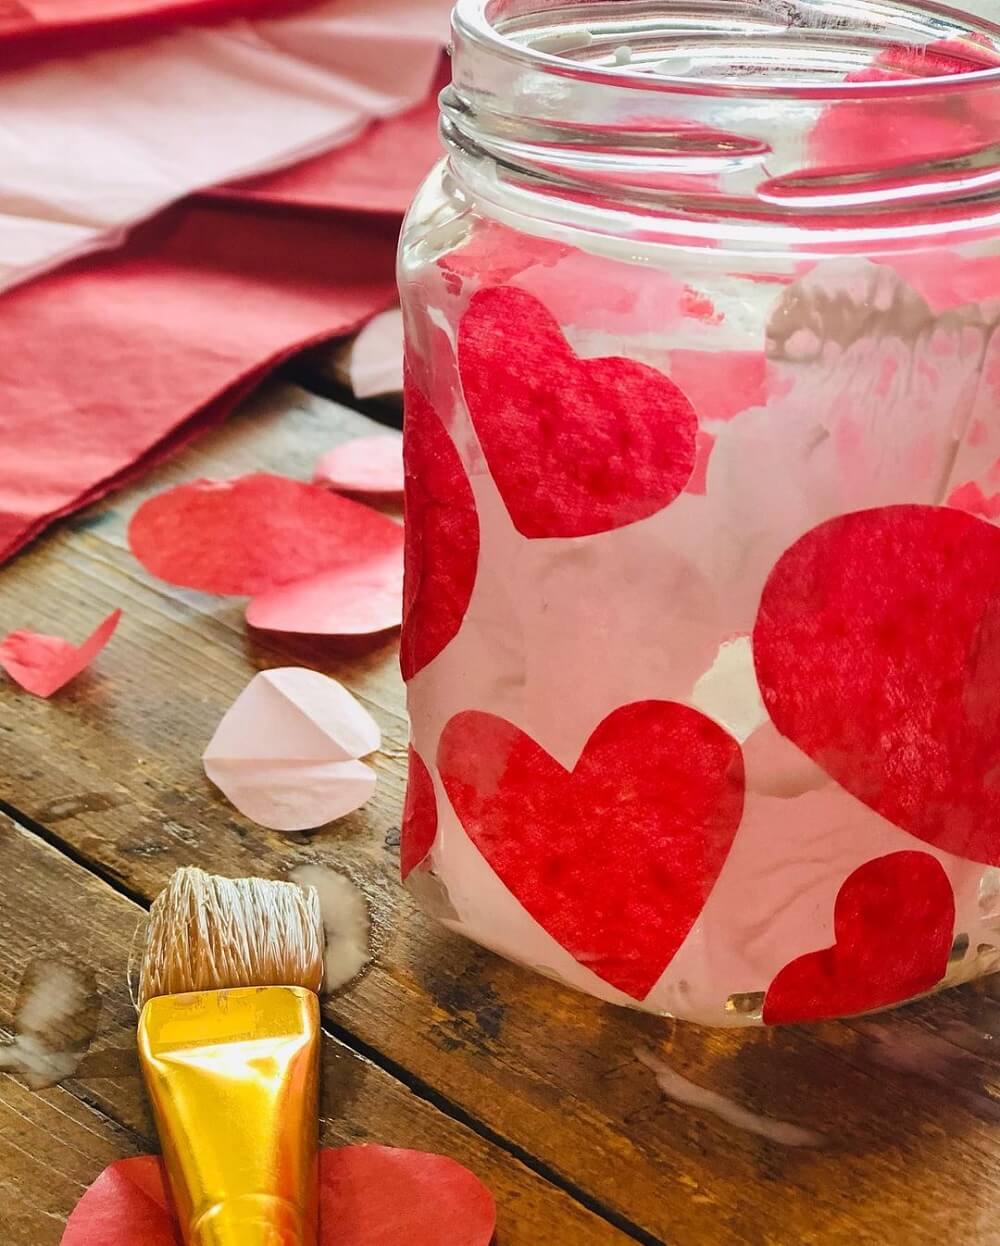 Mason jar with hearts glued on next to red tissue paper and a gold taklon brush.